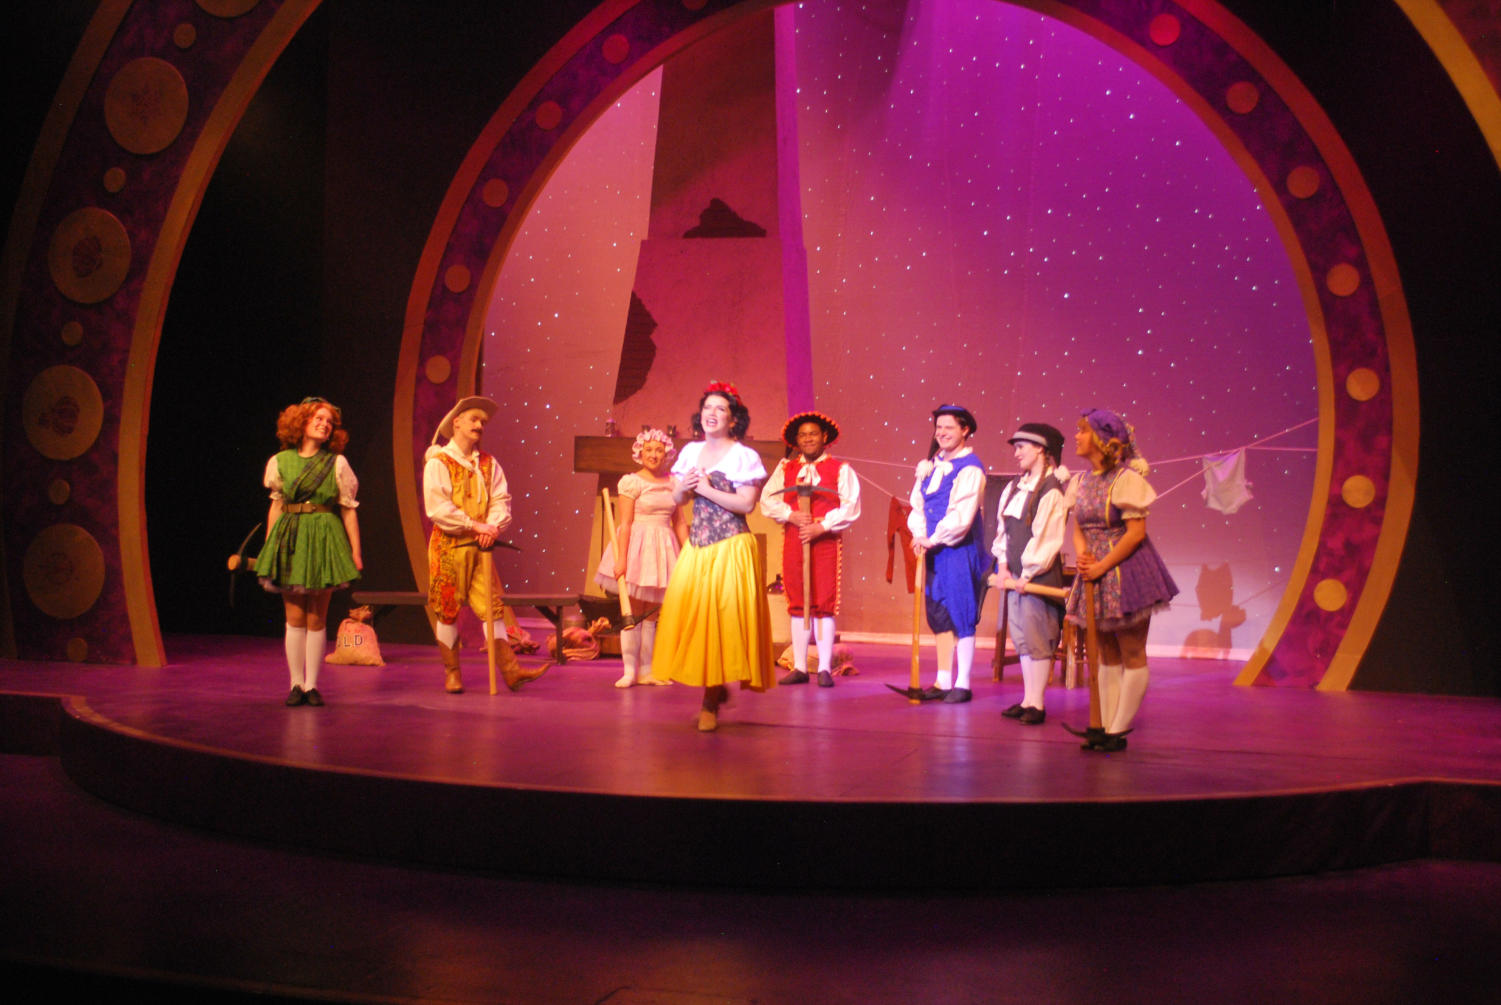 The Princess Plays is divided into two stories that reimgaing the famous tales of Snow White and Sleeping Beauty.